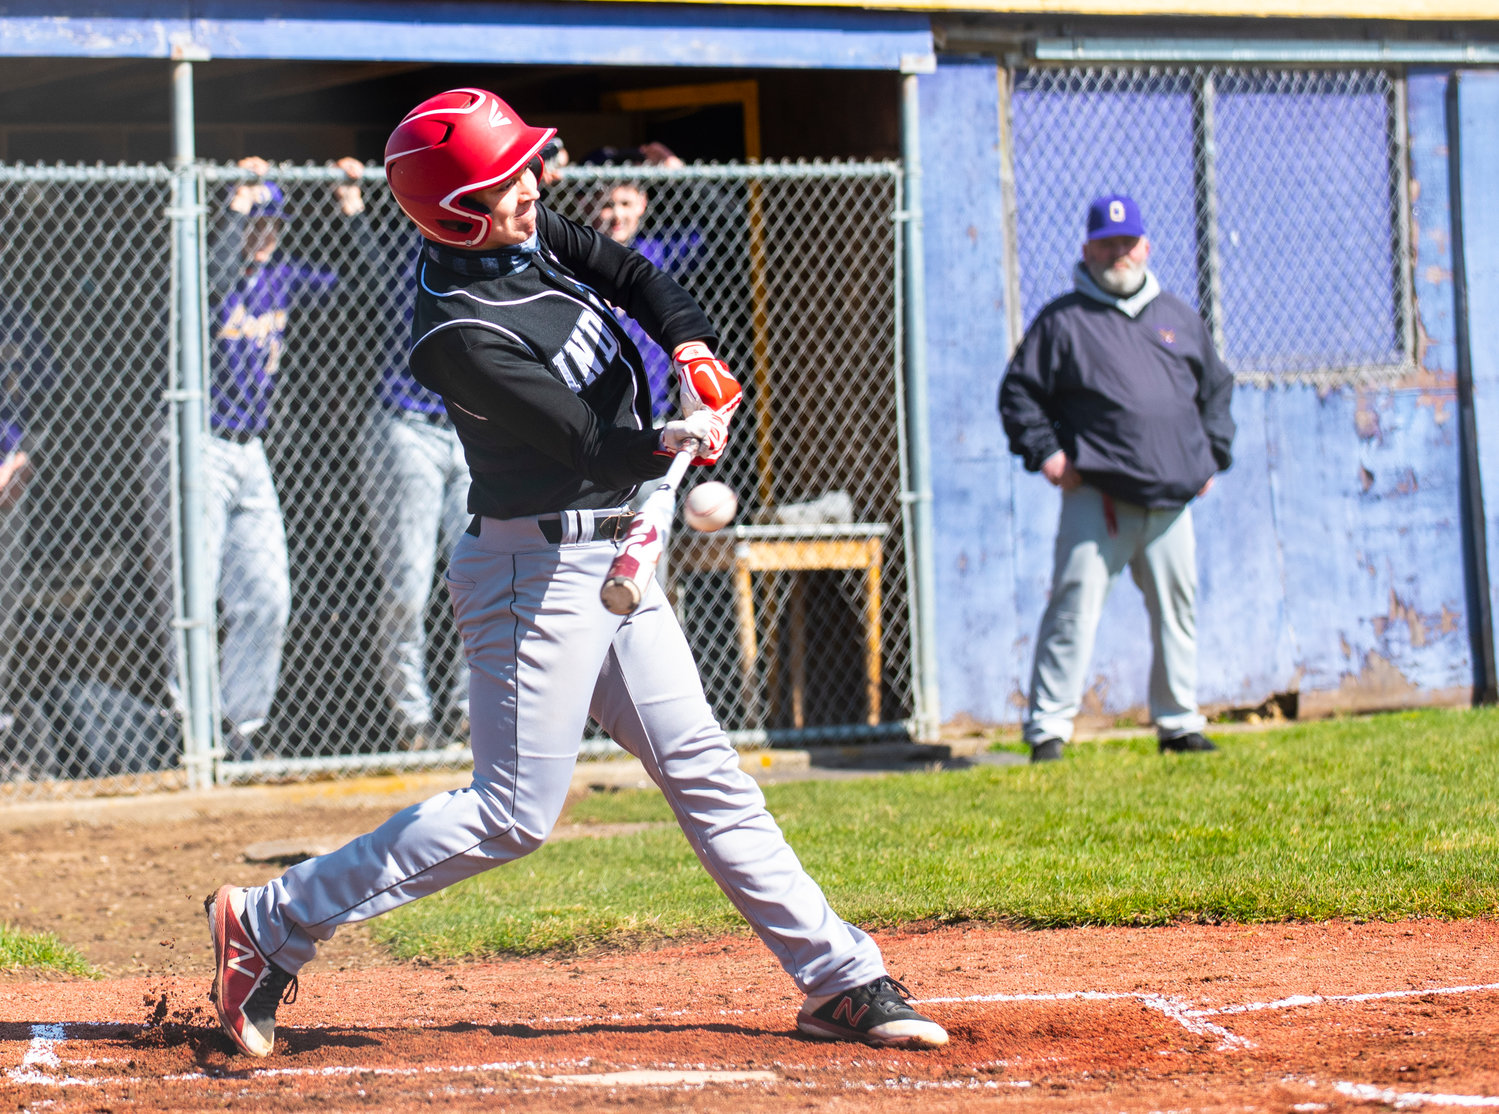 Toledo's Ryan Bloomstrom connects on a pitch from Onalaska on Friday.